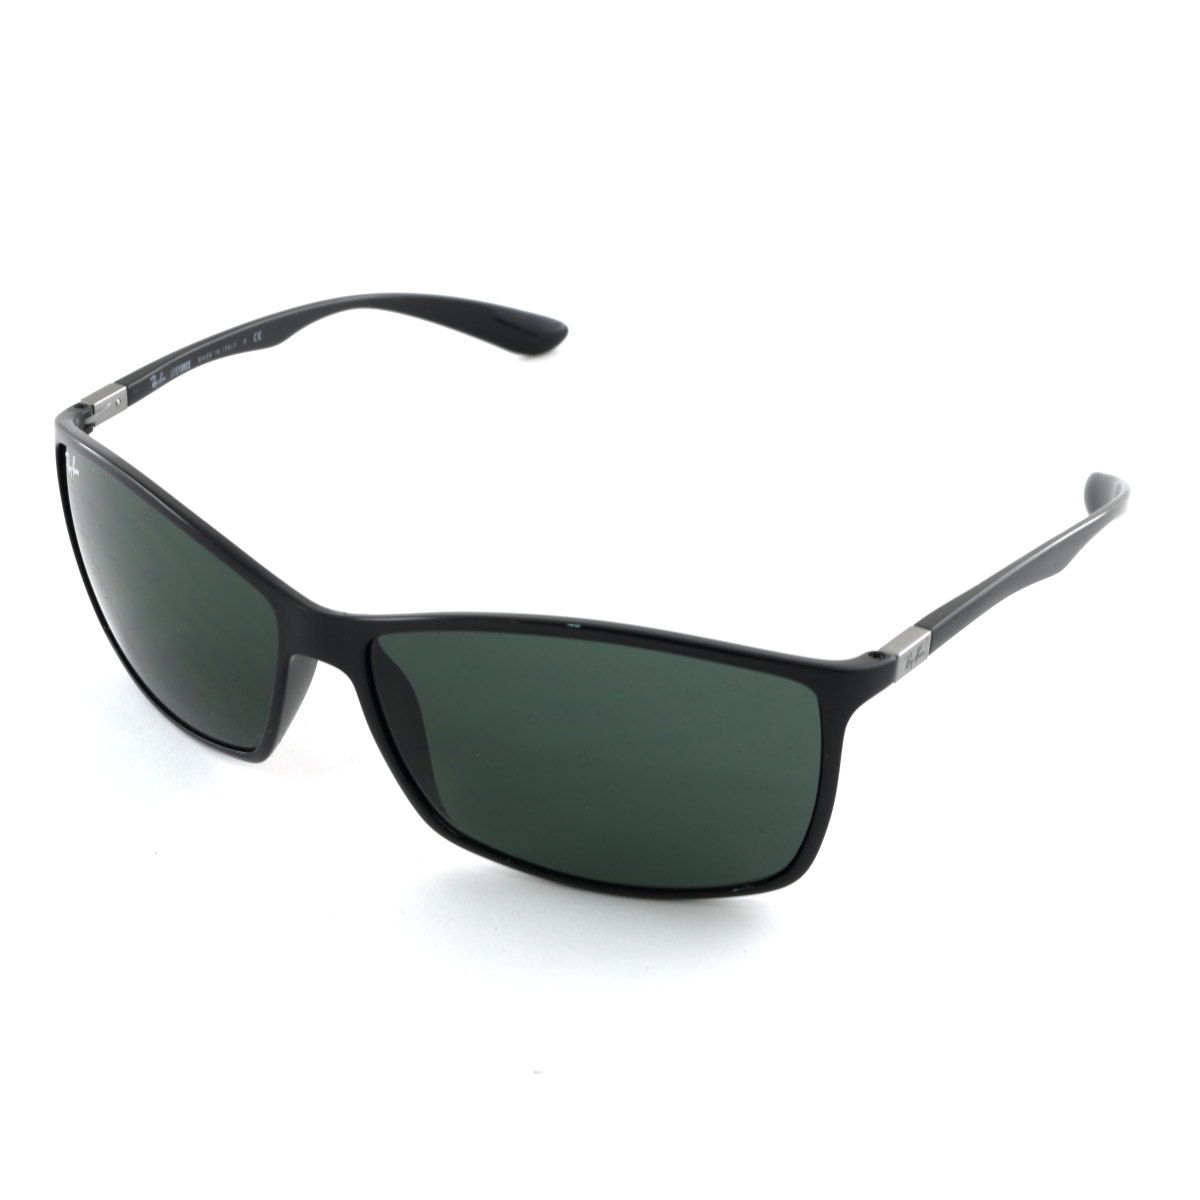 RB4179 601S9A Sunglasses - size 62